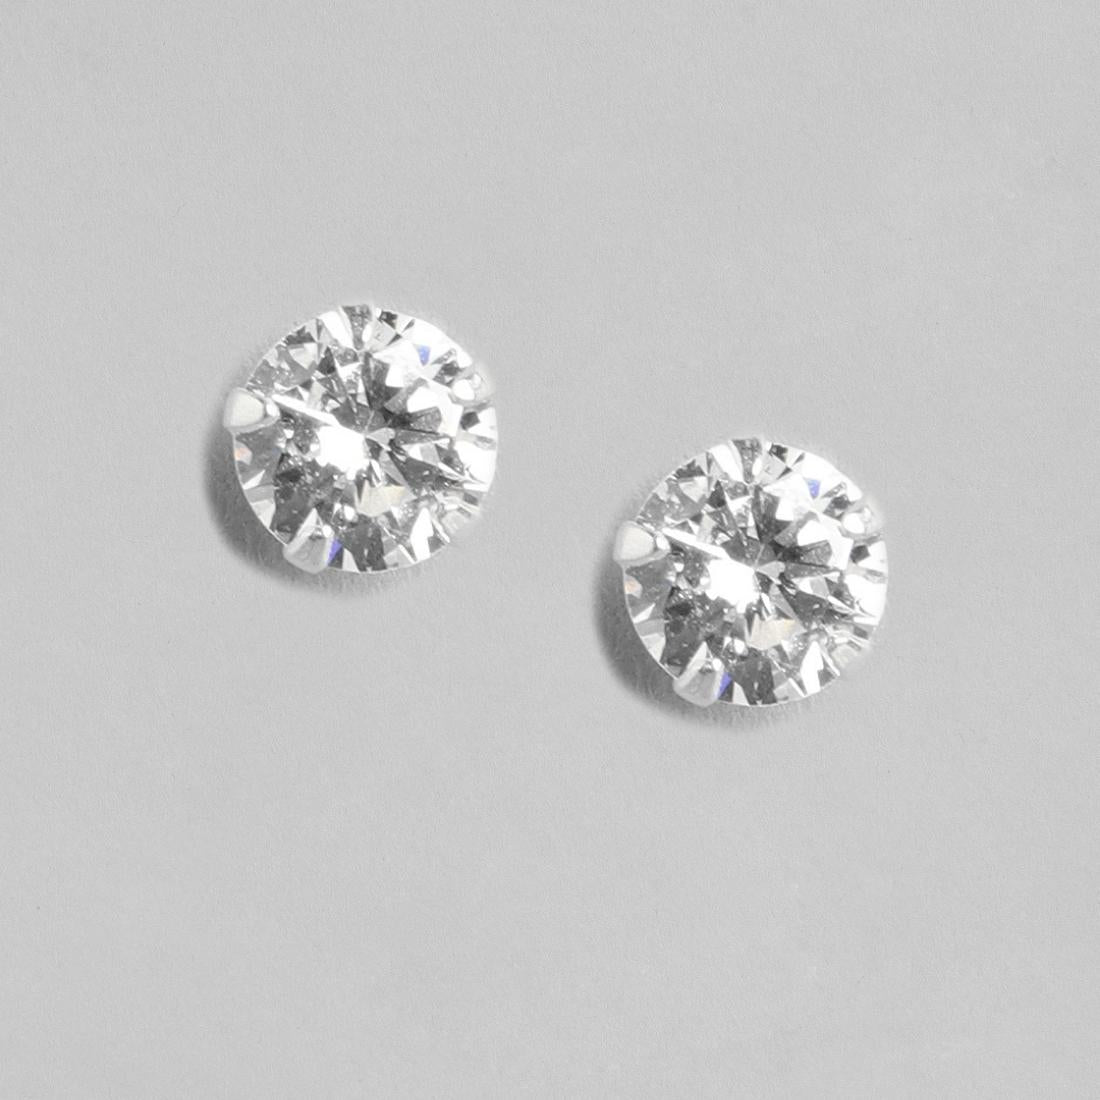 All-in-One 925 Sterling Silver Earring Combo